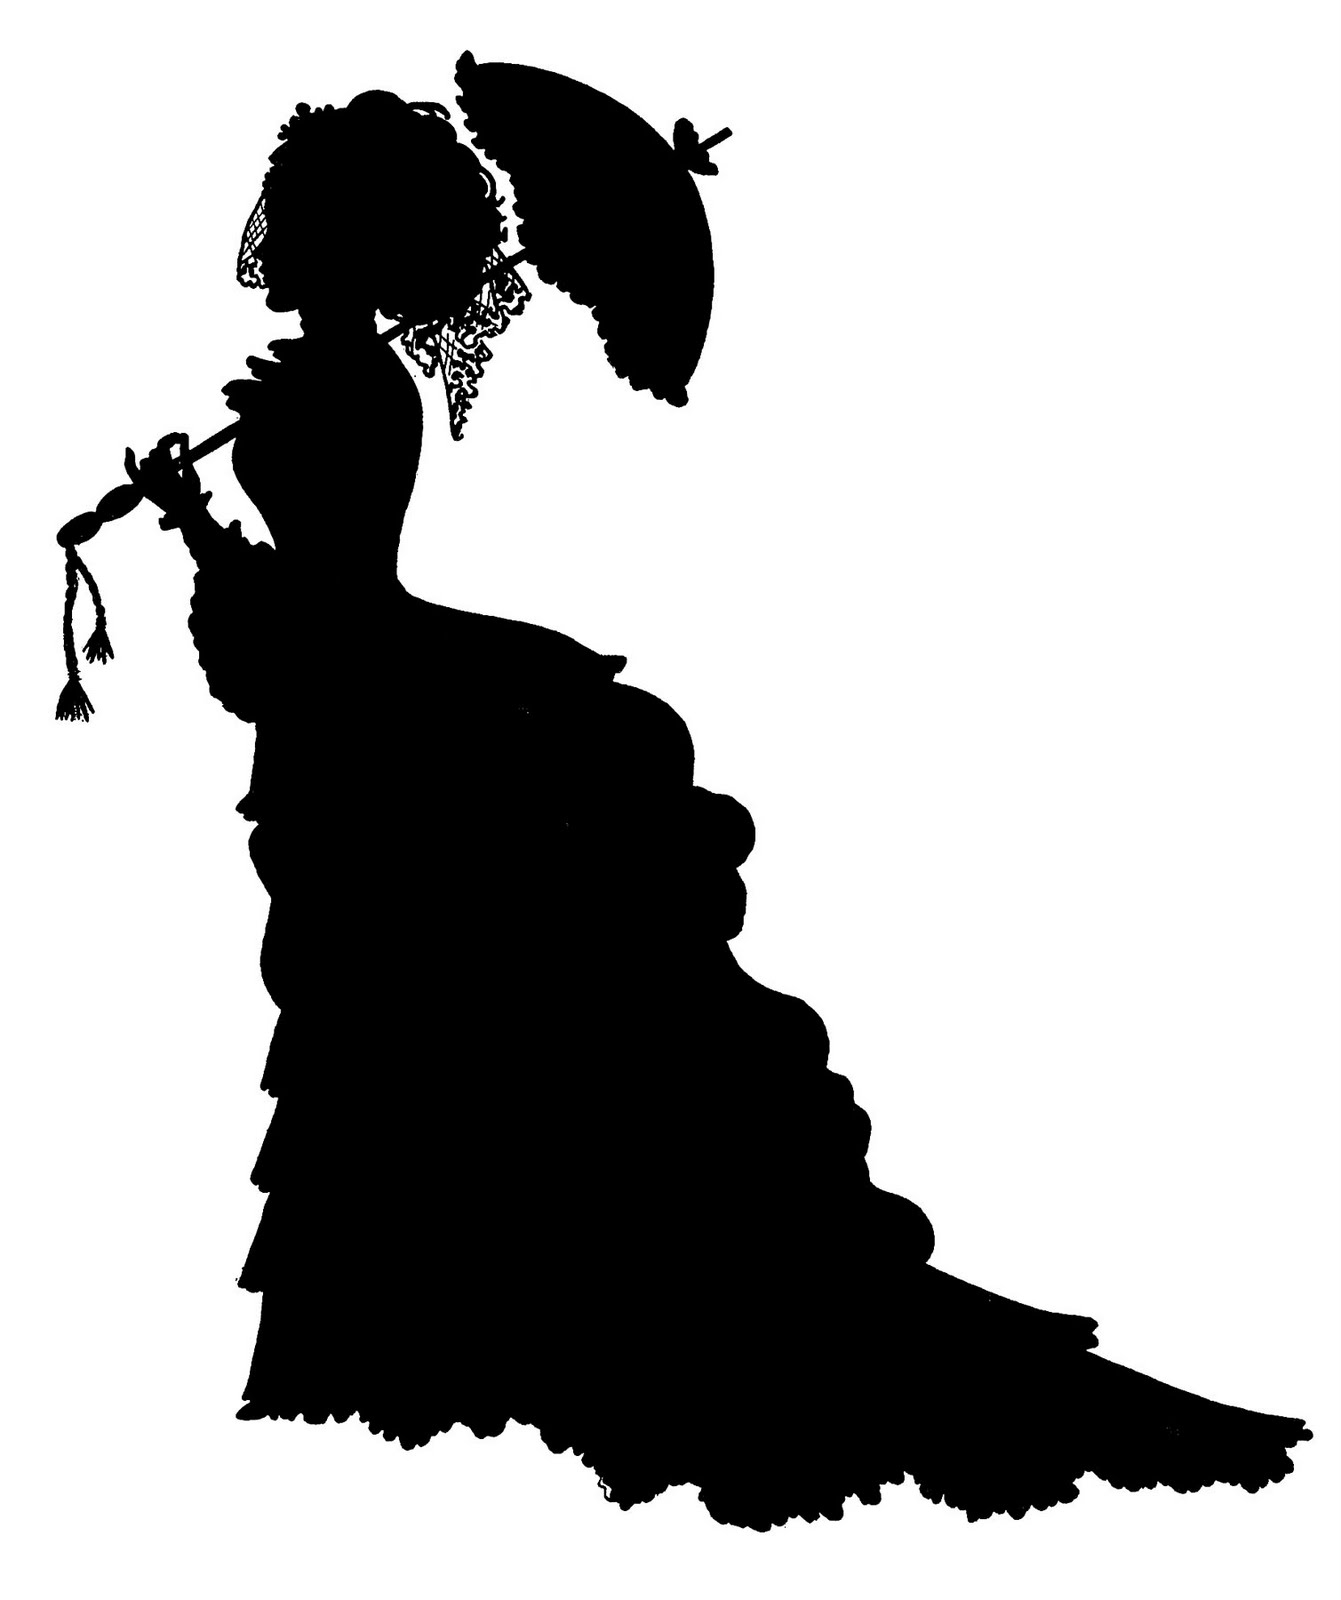 Woman Silhouette Images - ClipArt Best